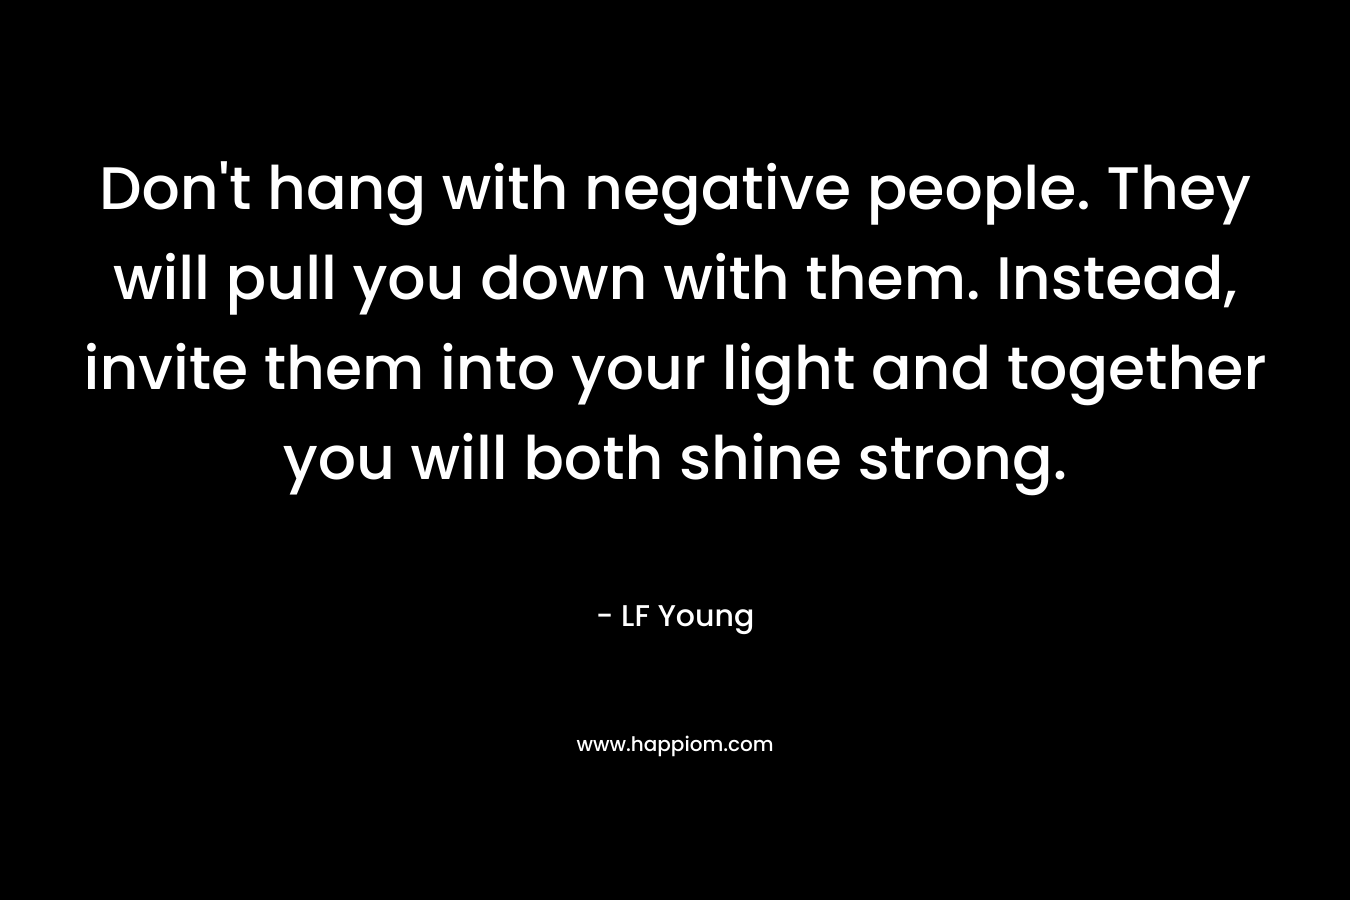 Don't hang with negative people. They will pull you down with them. Instead, invite them into your light and together you will both shine strong.